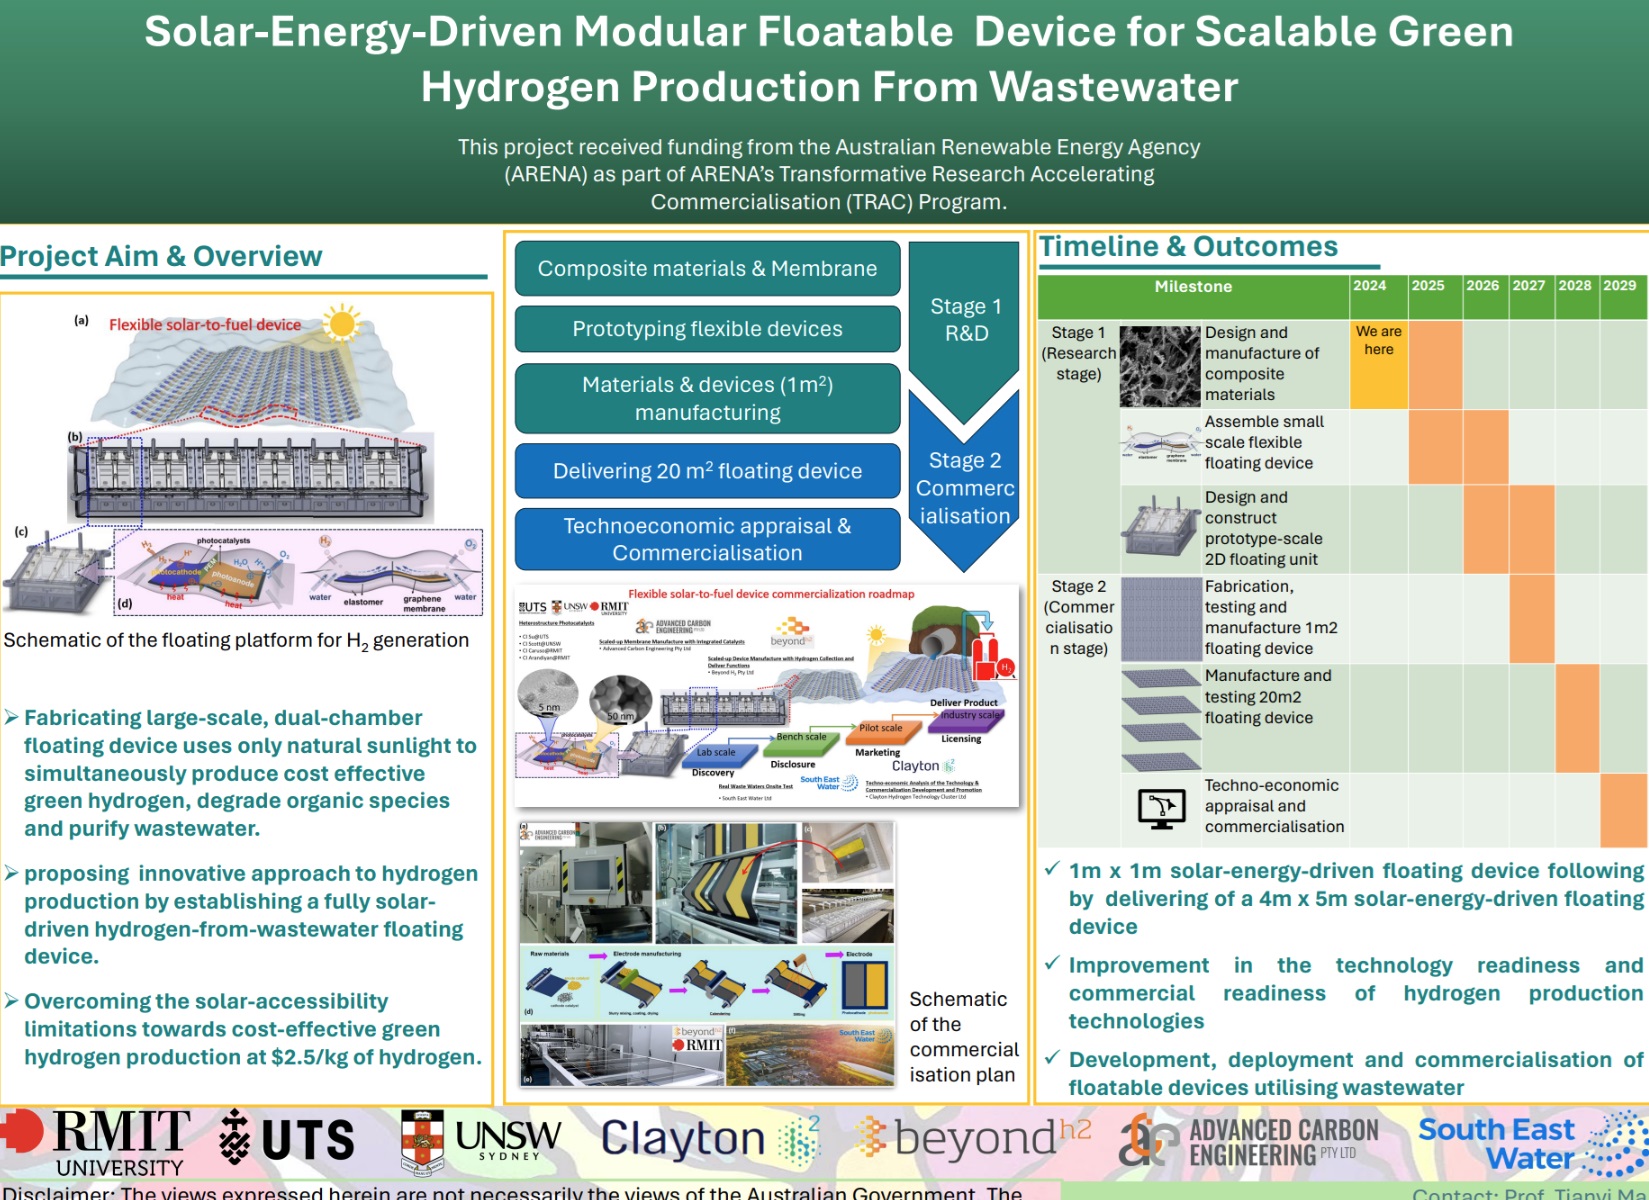 RMIT - Solar-energy-driven modular floatable device for scalable green hydrogen production - Poster - Cover